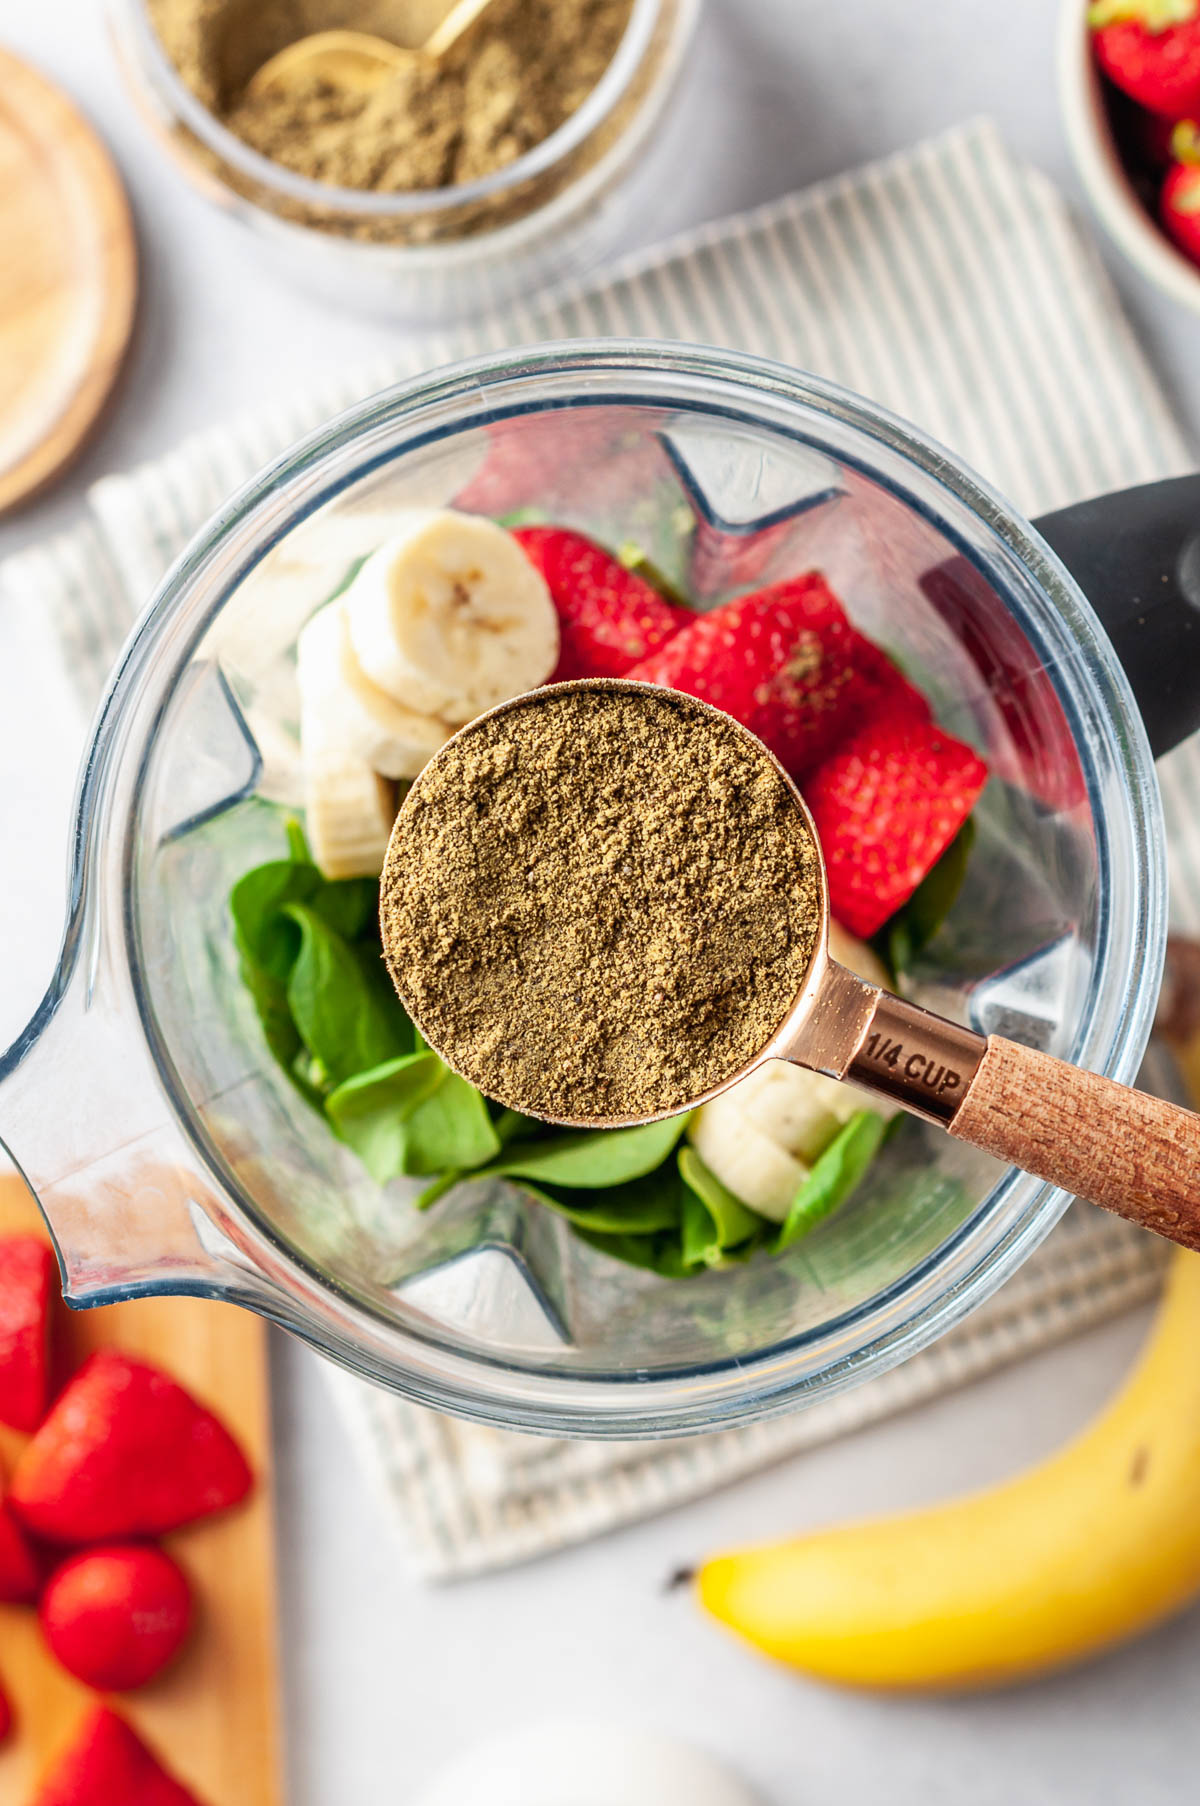 Scoop with homemade protein powder hovering over a blender full of smoothie ingredients.